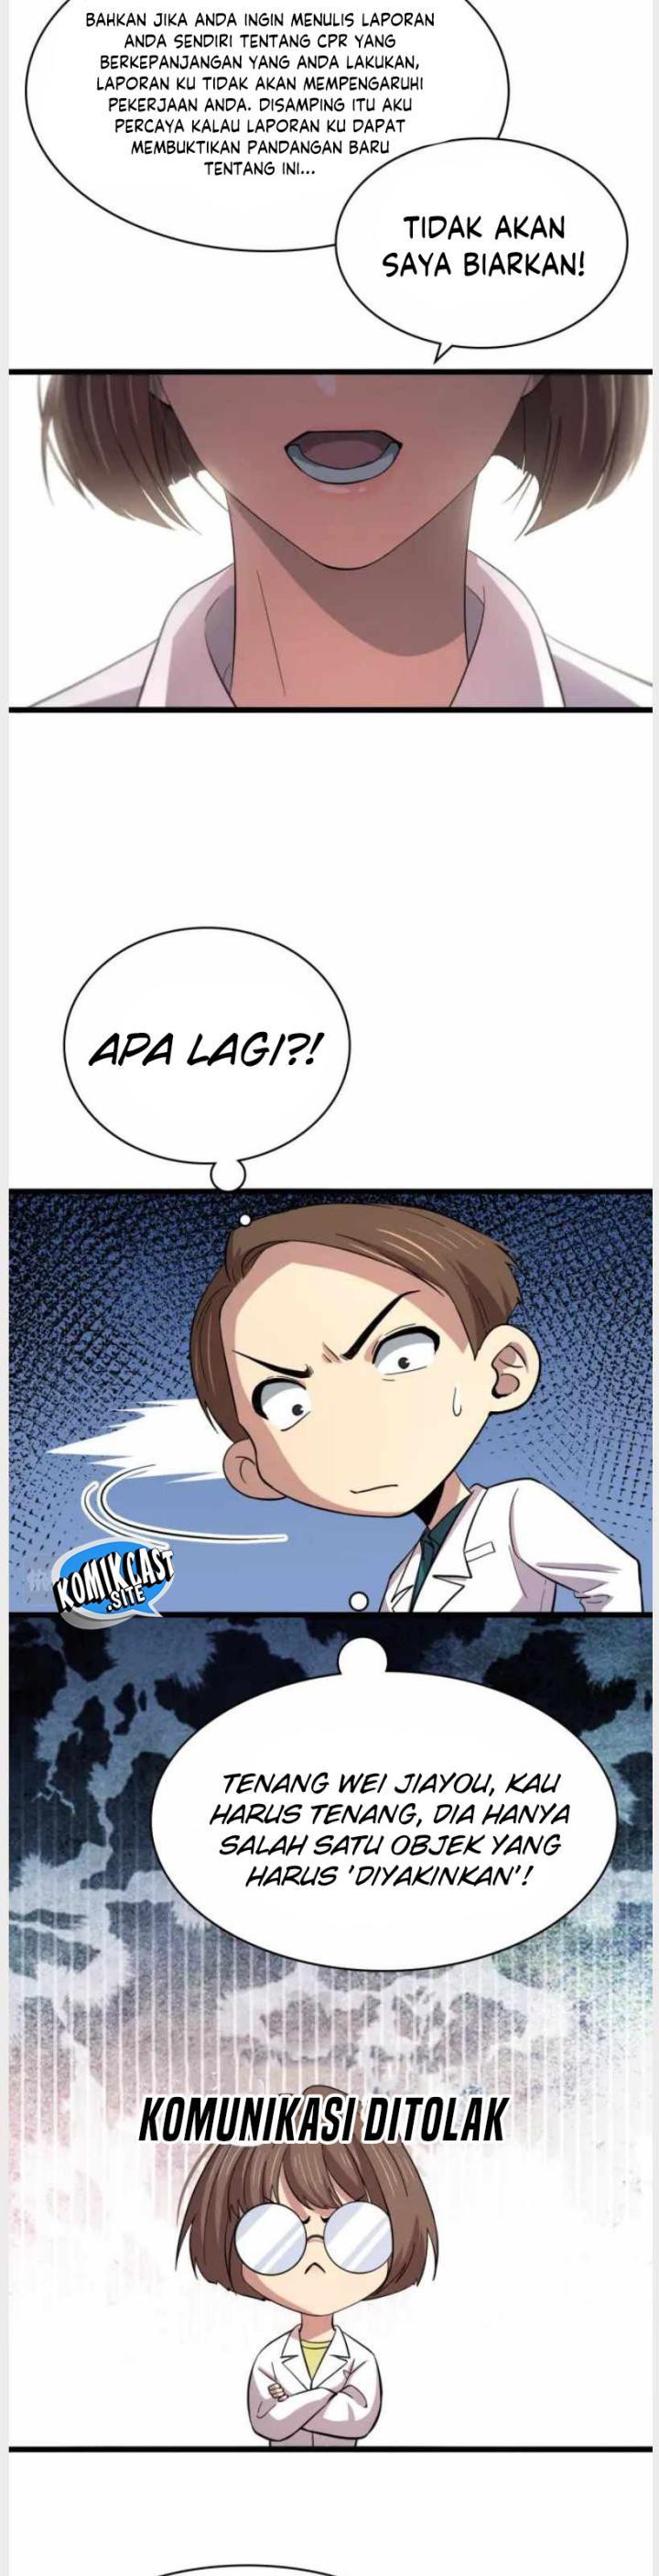 Great Doctor Ling Ran Chapter 150